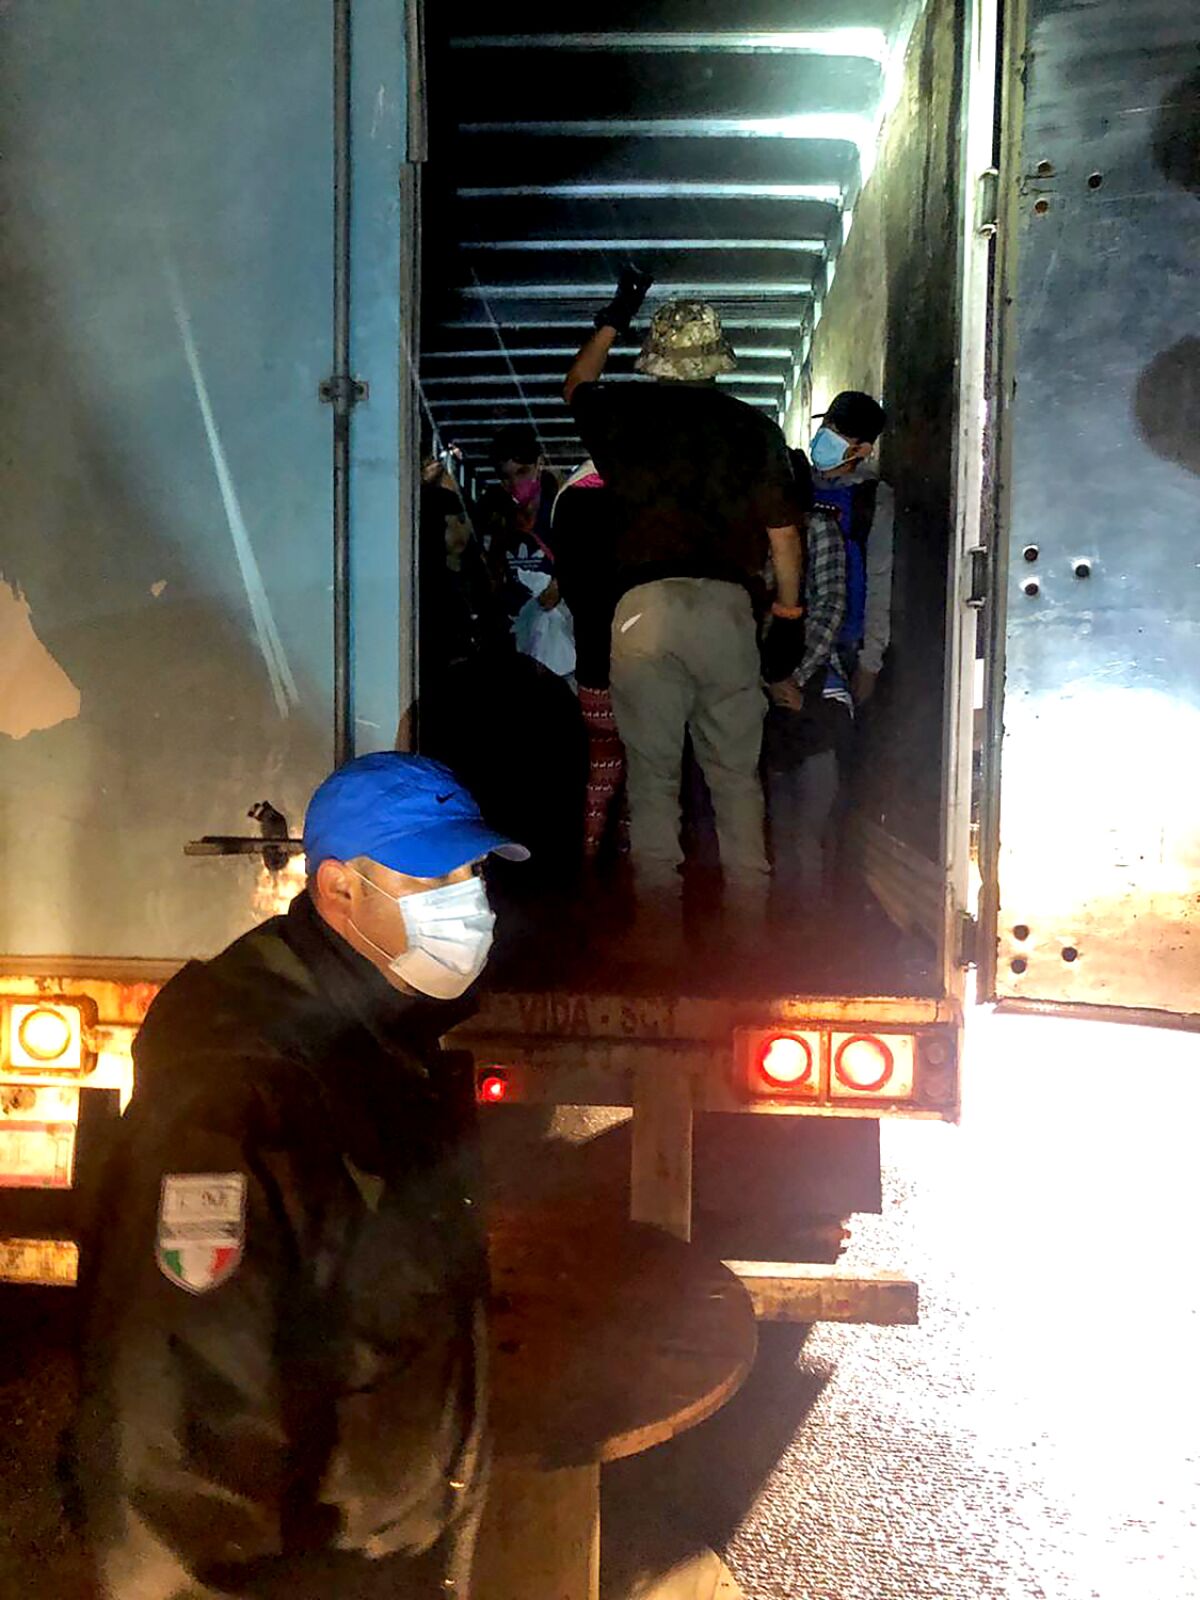 The rescue of 201 migrants in the back of a big rig in Mexico's southern Chiapas state